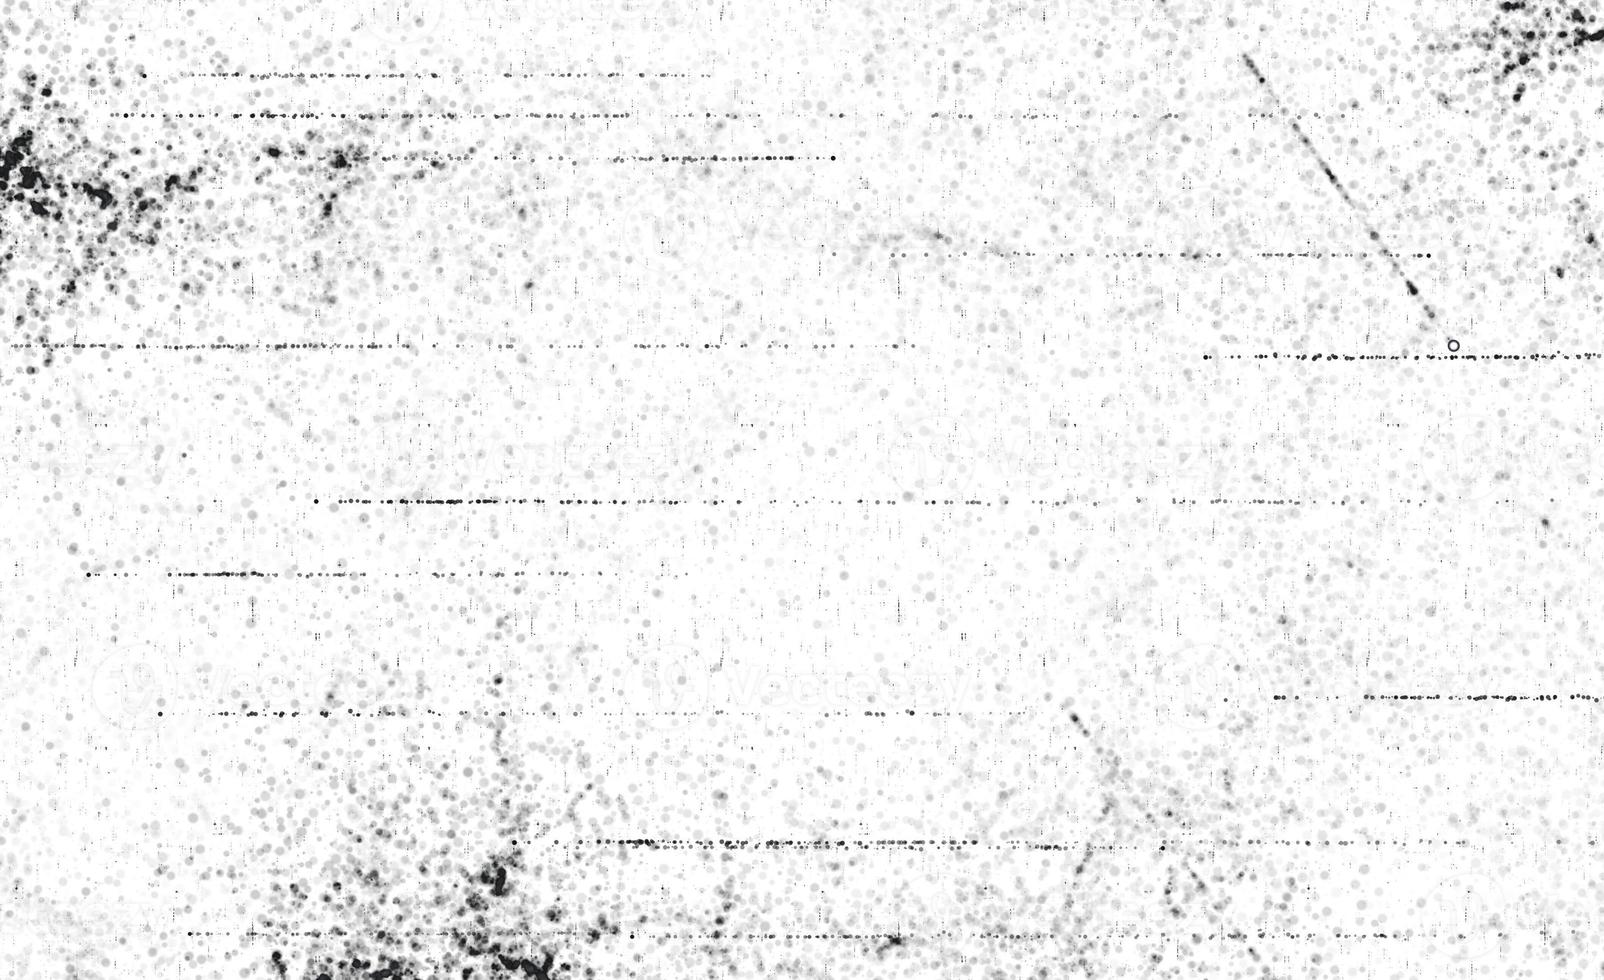 grunge texture for background.Grainy abstract texture on a white background.highly Detailed grunge background with space photo